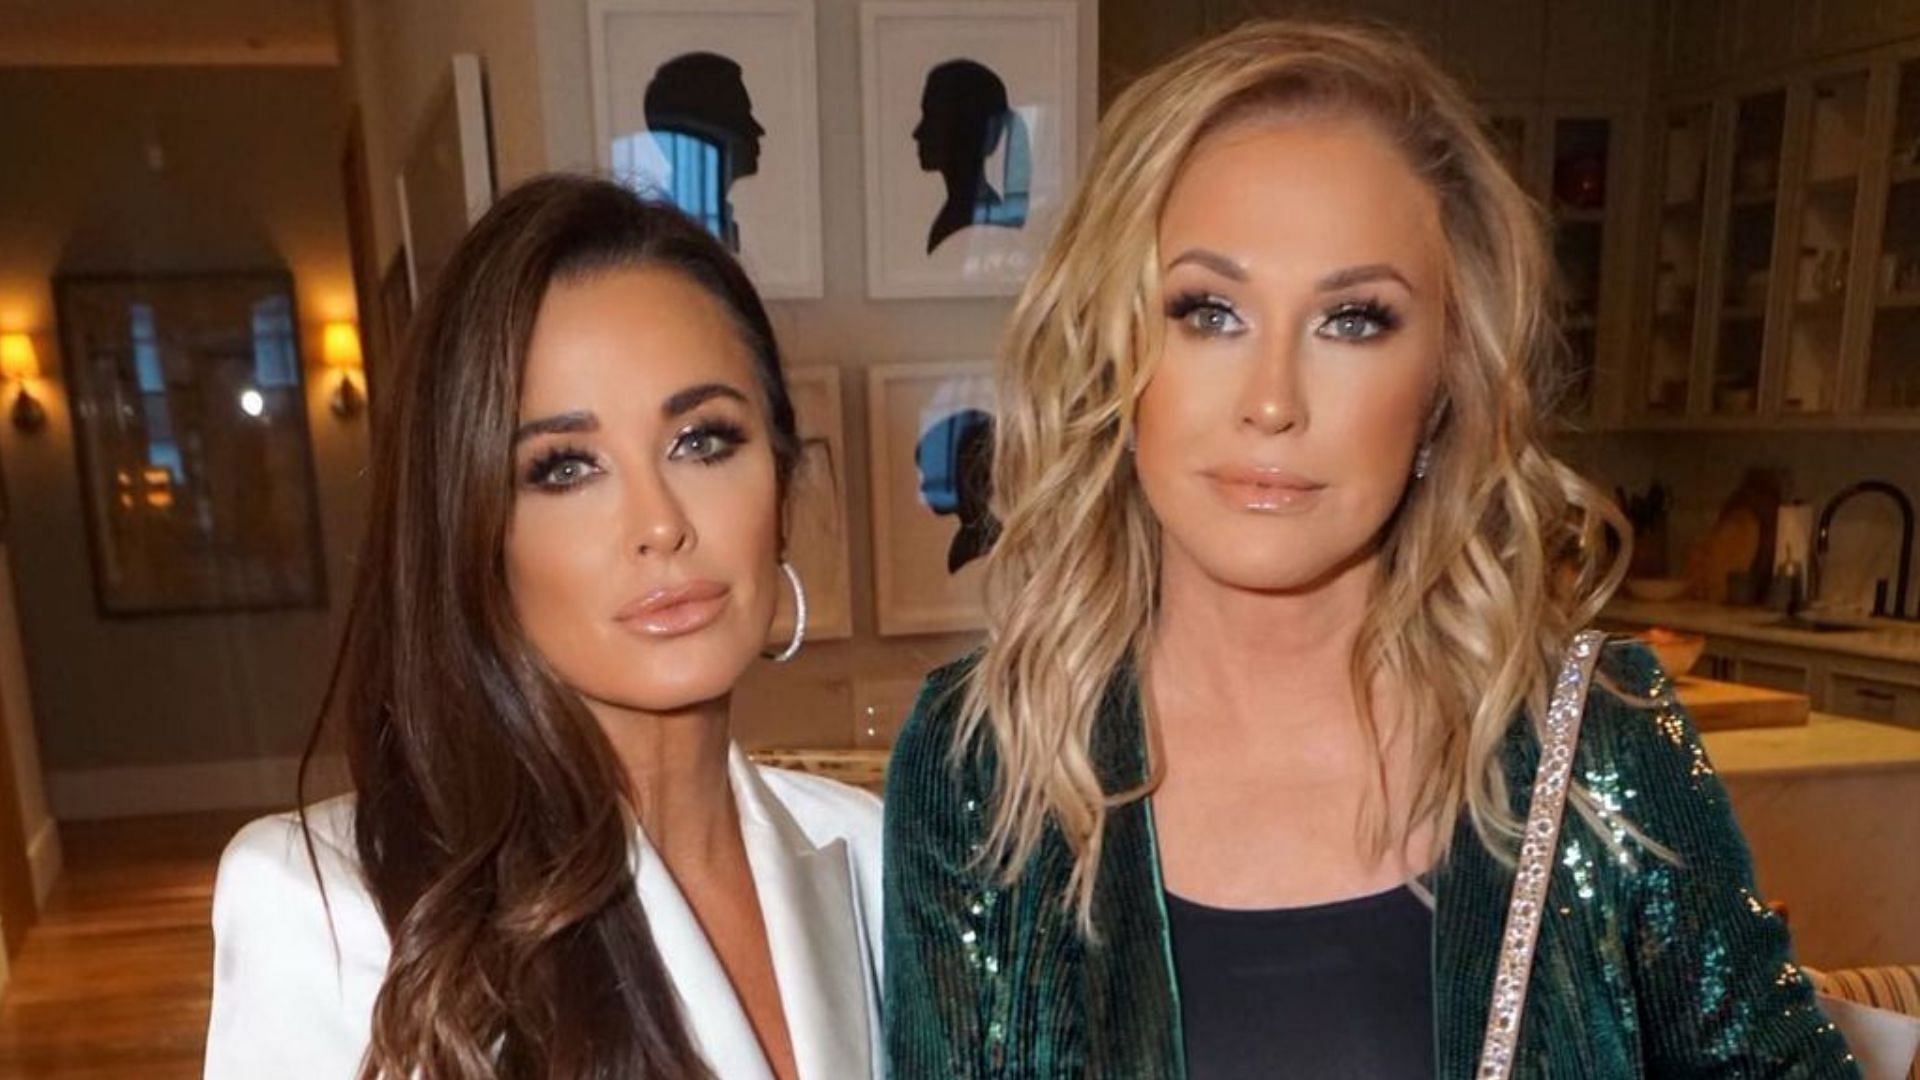 Sister-duo Kyle Richards and Kathy Hilton from RHOBH